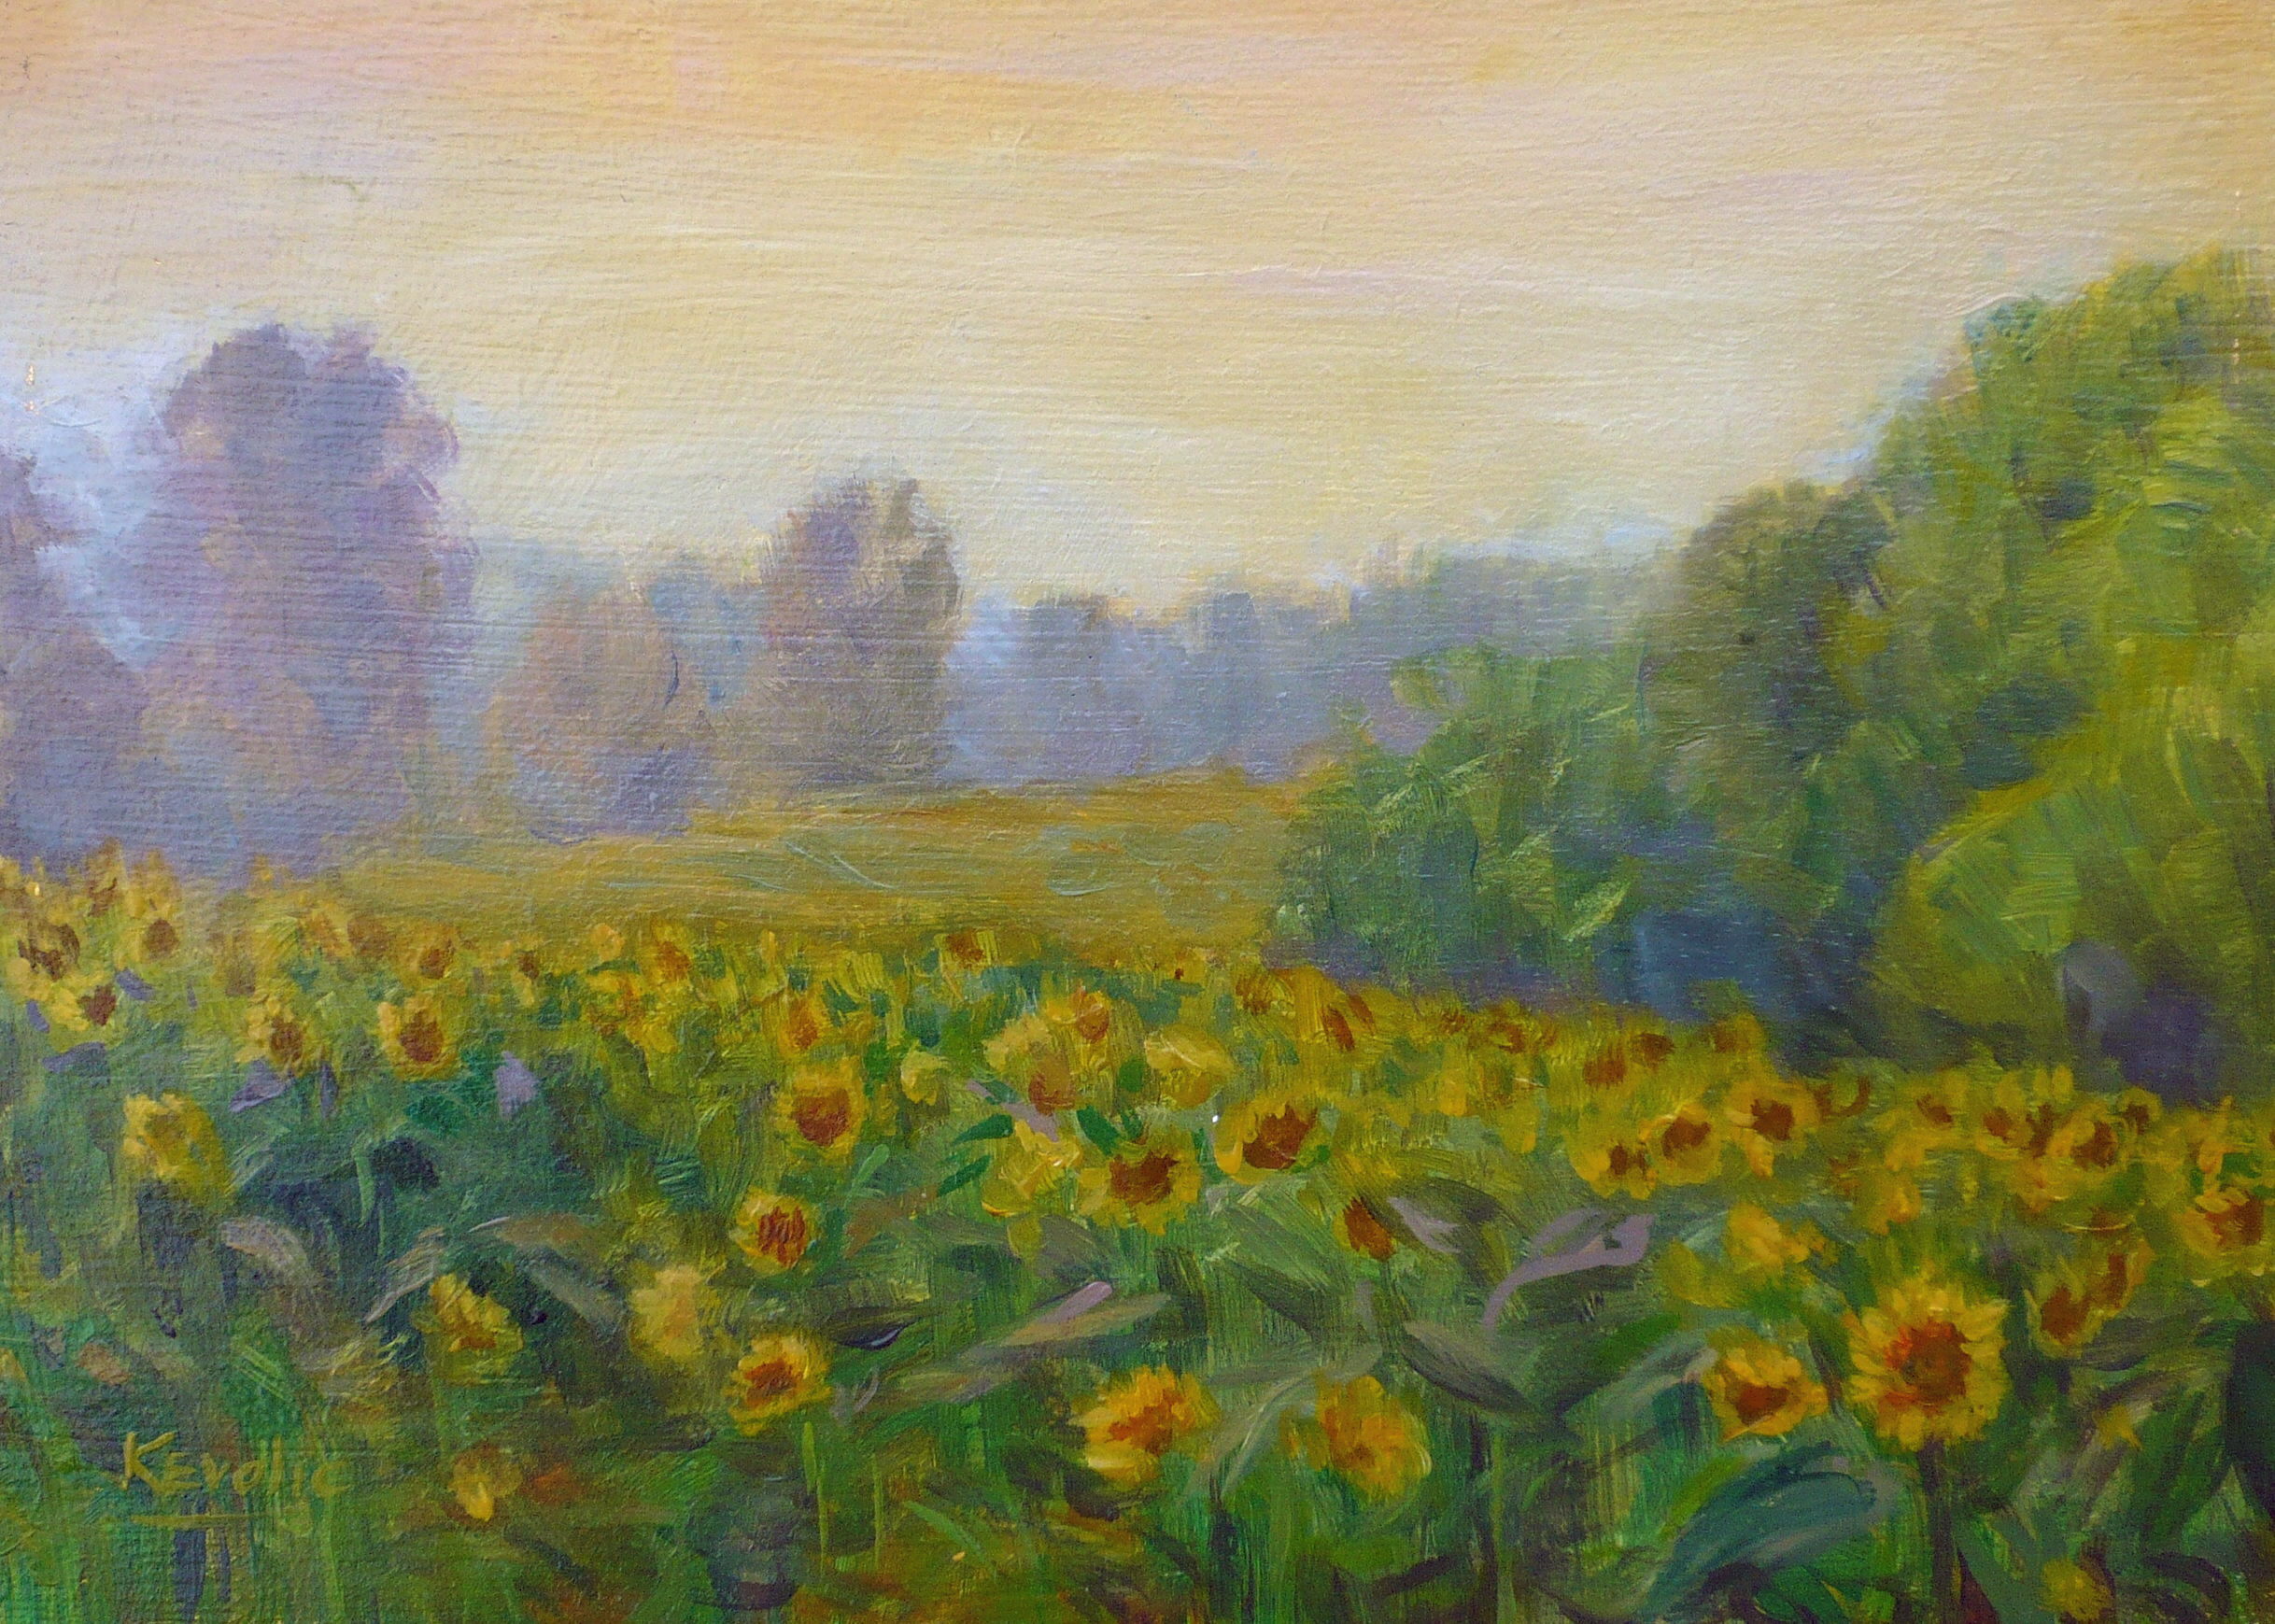 A Field of Sunflowers”